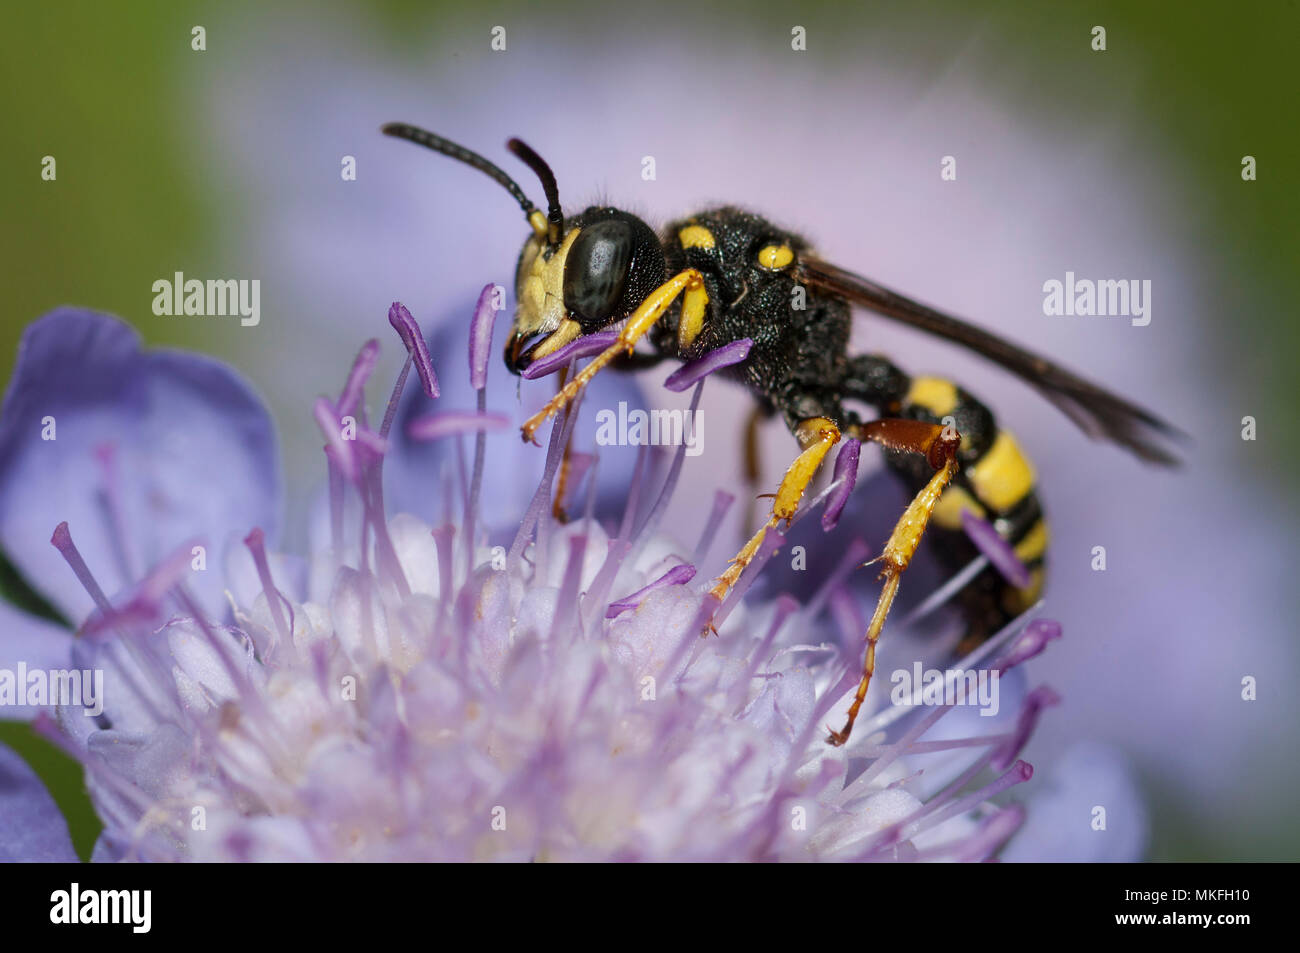 Ornate Tailed Digger Wasp (Cerceris rybyensis) female on flower, Regional Natural Park of Northern Vosges, France Stock Photo